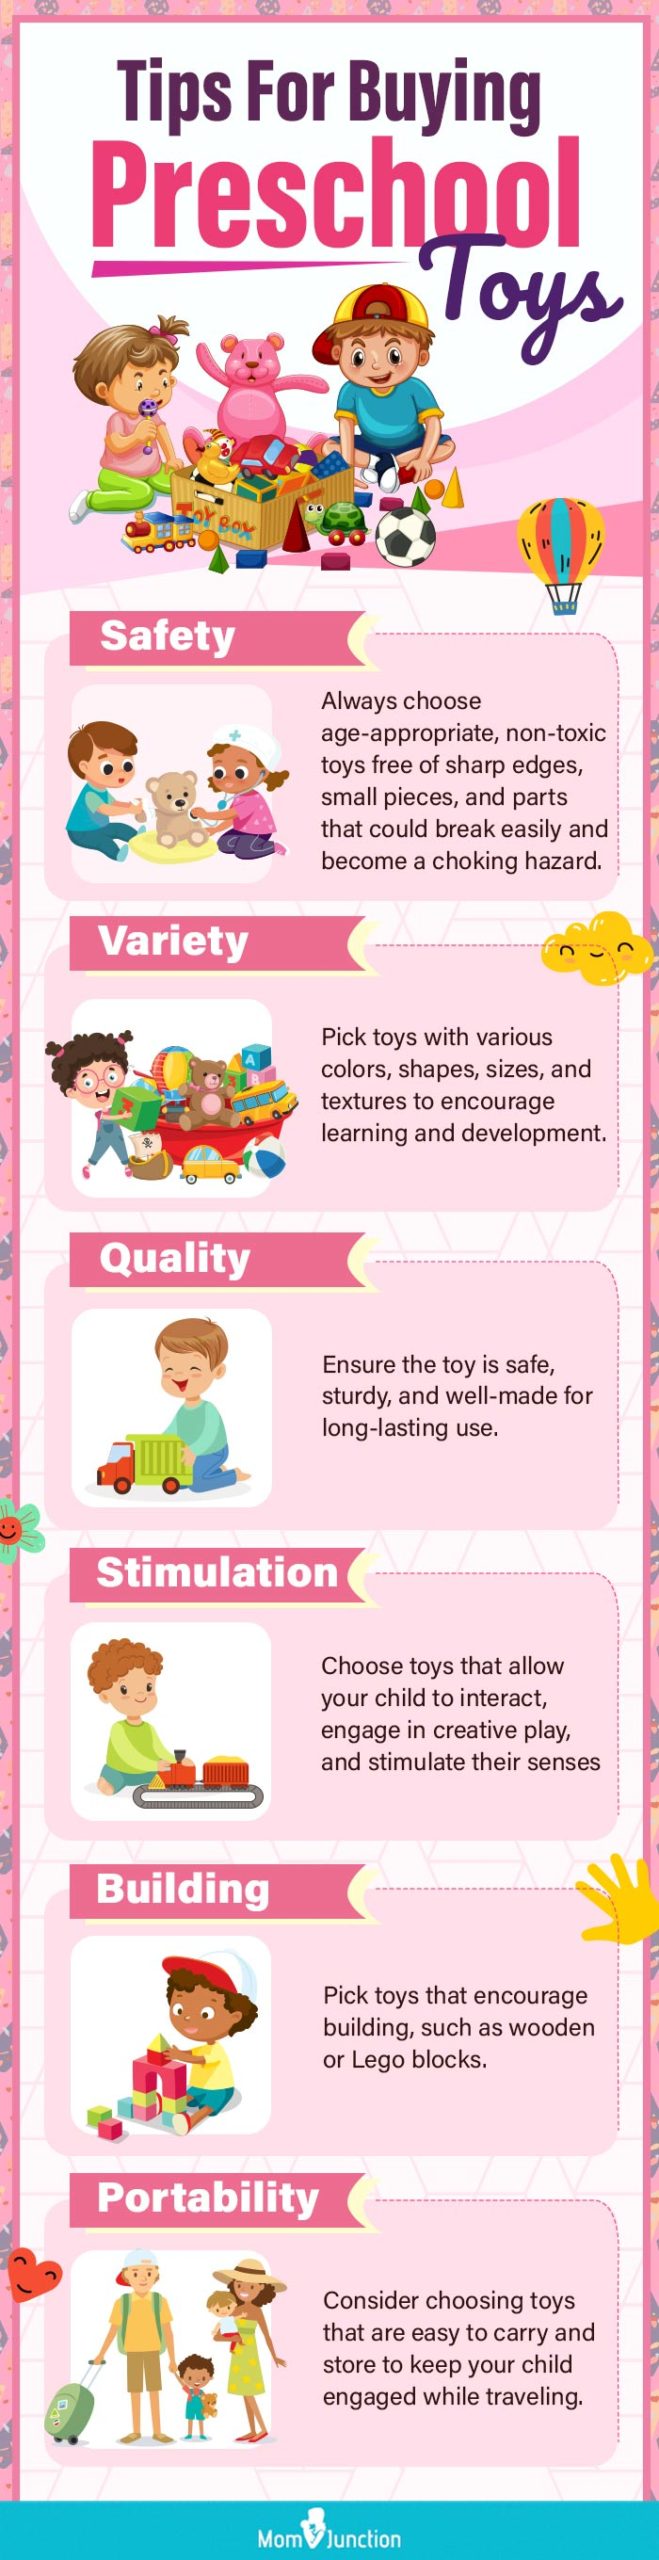 Tips For Buying Preschool Toys (infographic)